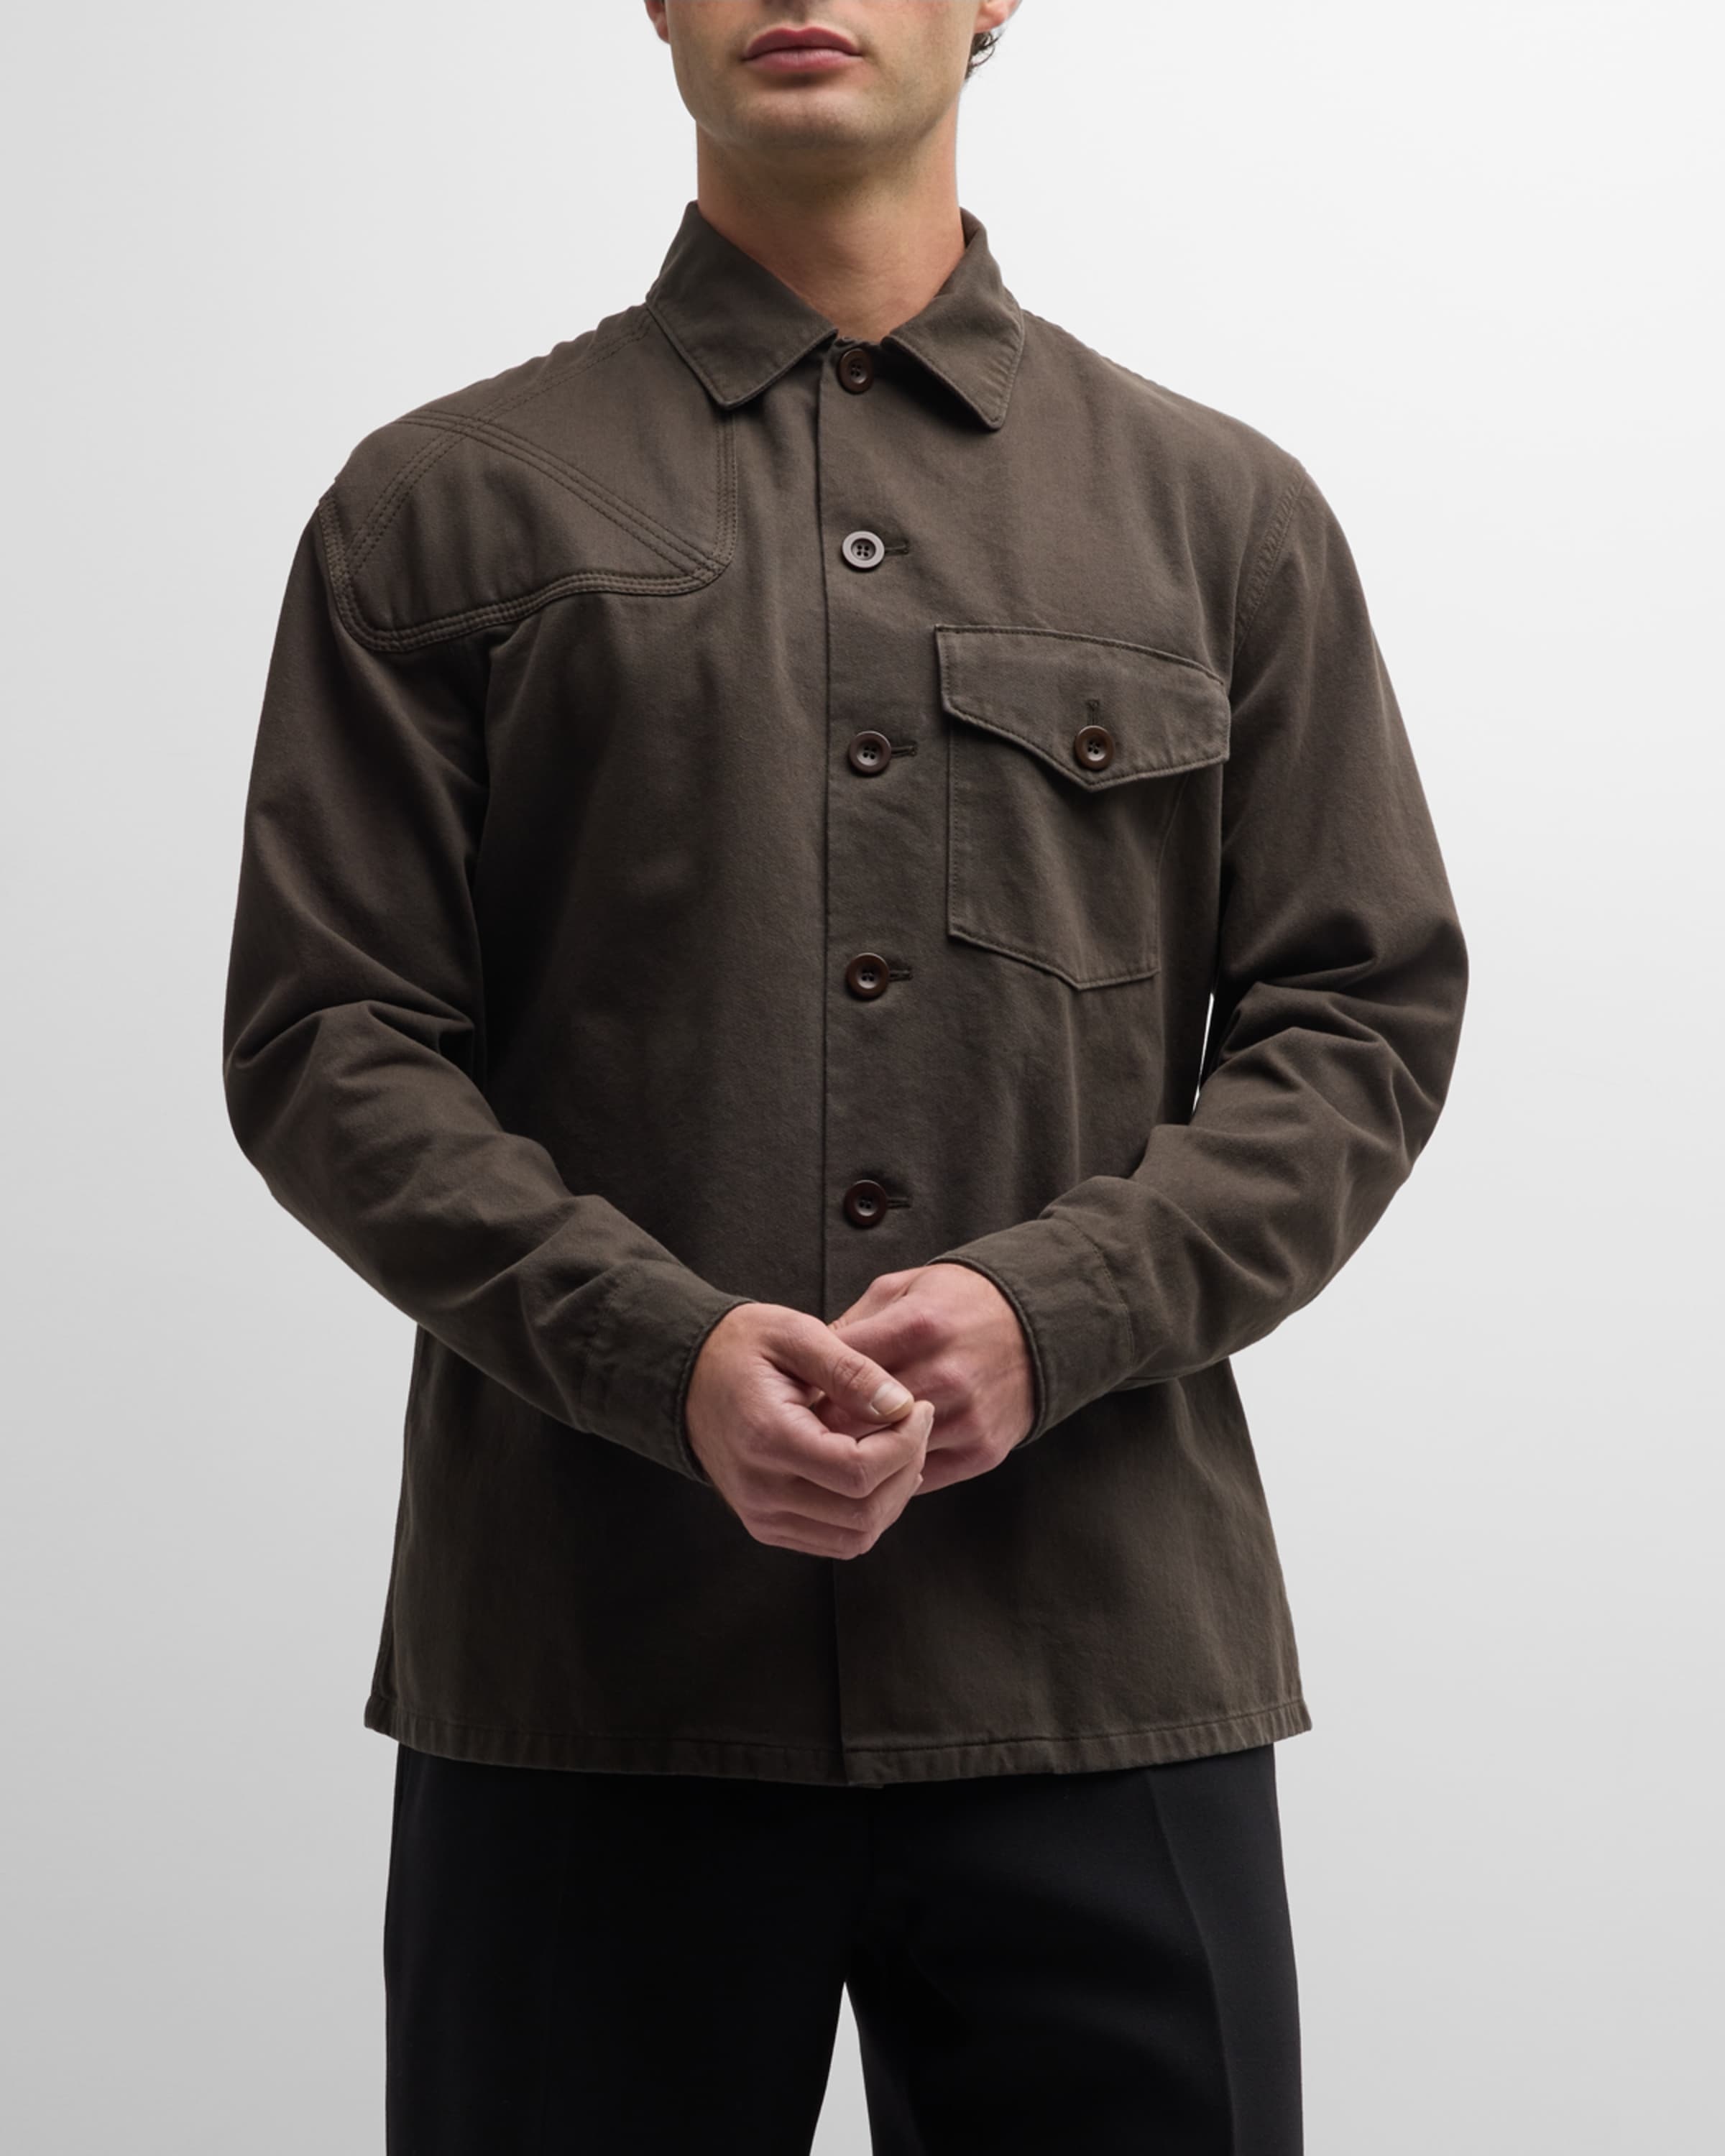 Men's Twill Shirt with Embroidered Patches - 4